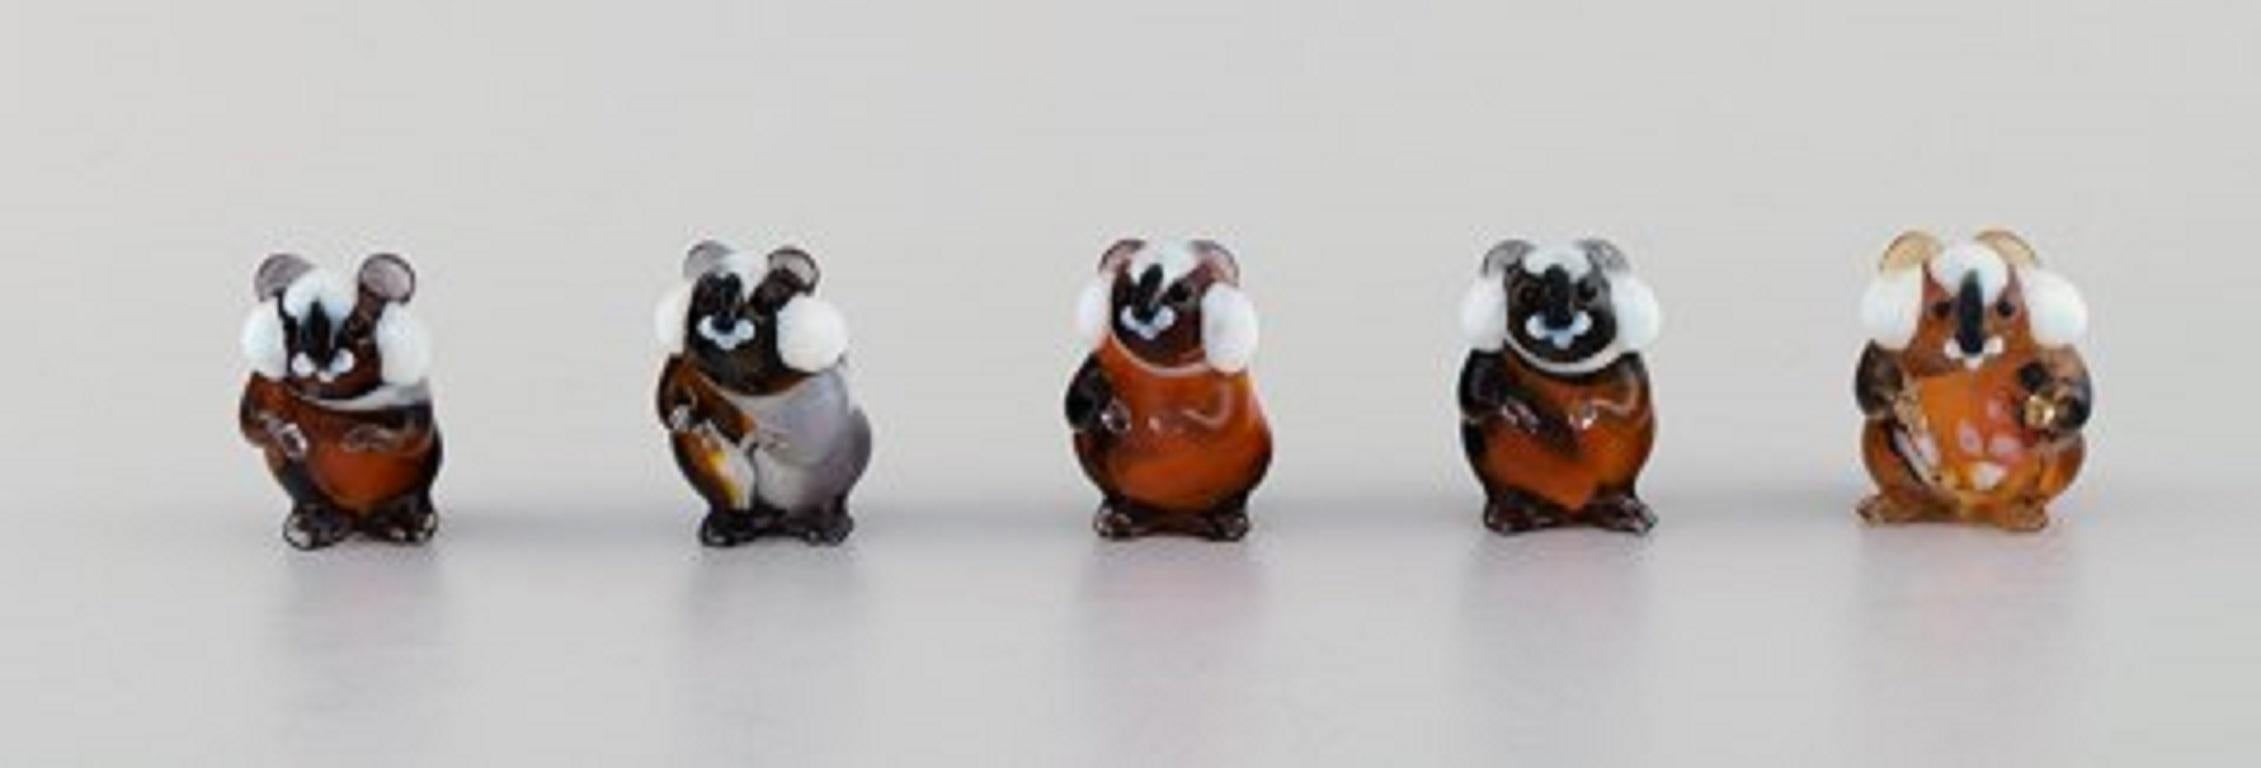 Swedish art glass. Ten miniature figures in mouth-blown art glass, 1970s-1980s.
Seal measures: 7.5 x 4 cm.
Dog measures: 10 x 3 cm.
In excellent condition.